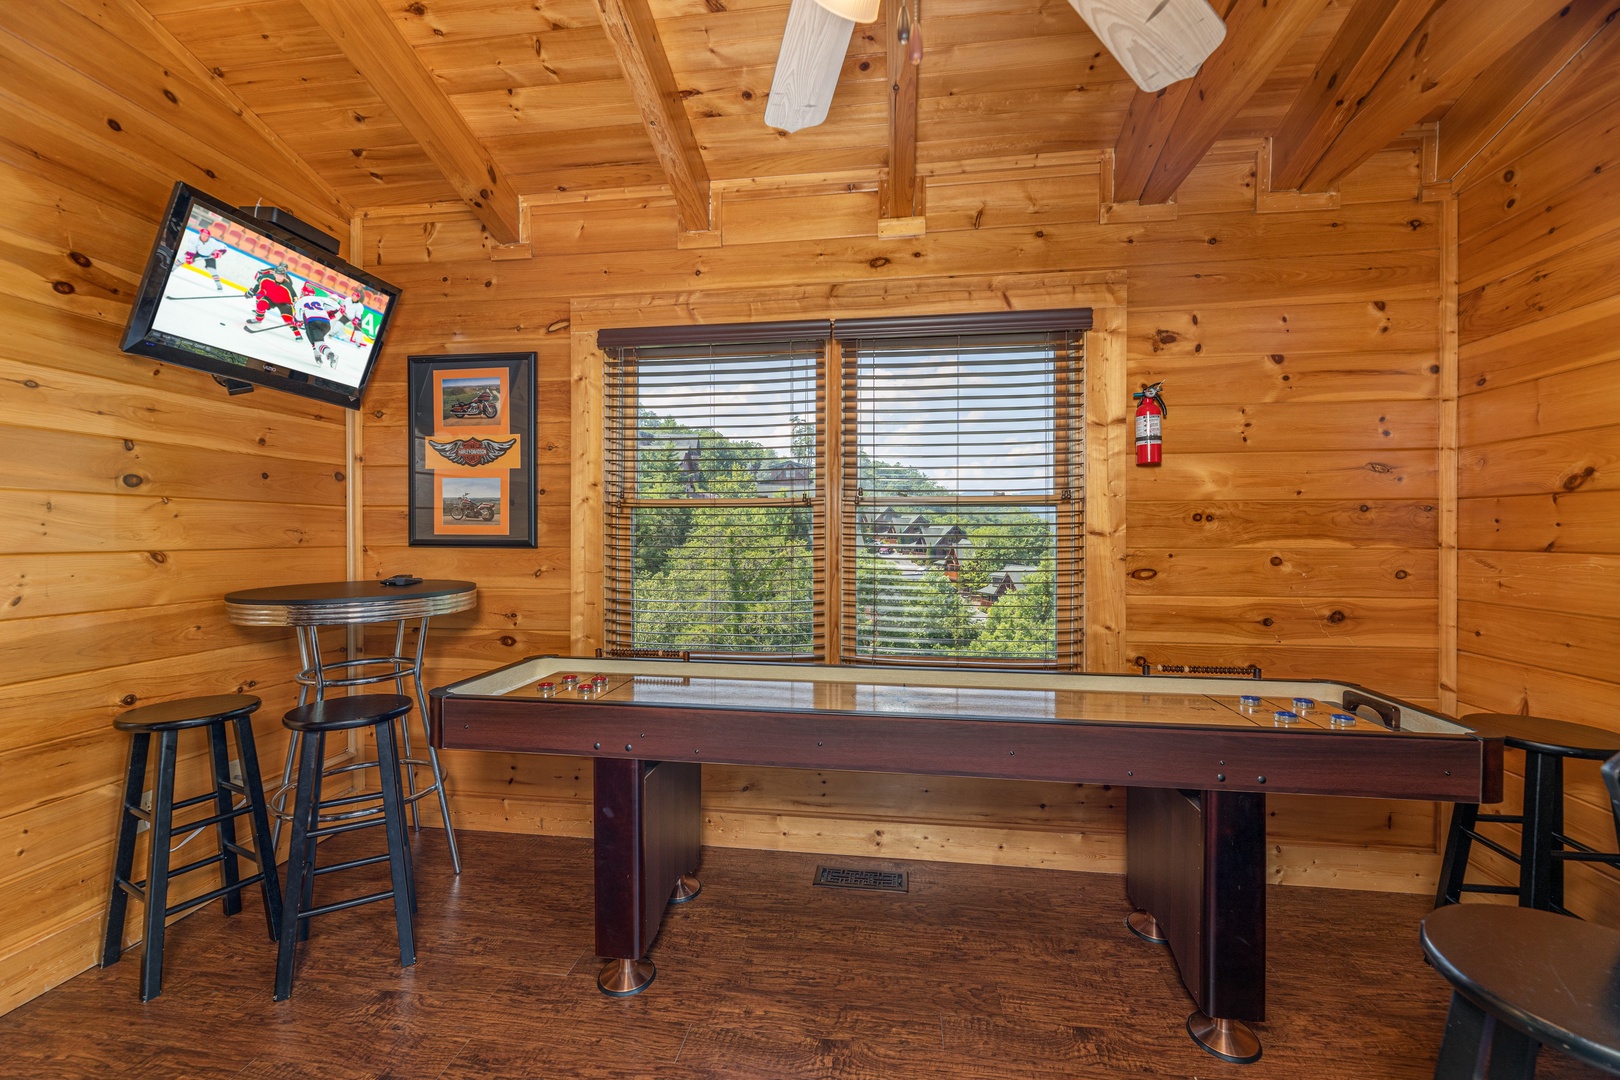 Air hockey table at Loving Every Minute, a 5 bedroom cabin rental located in Pigeon Forge